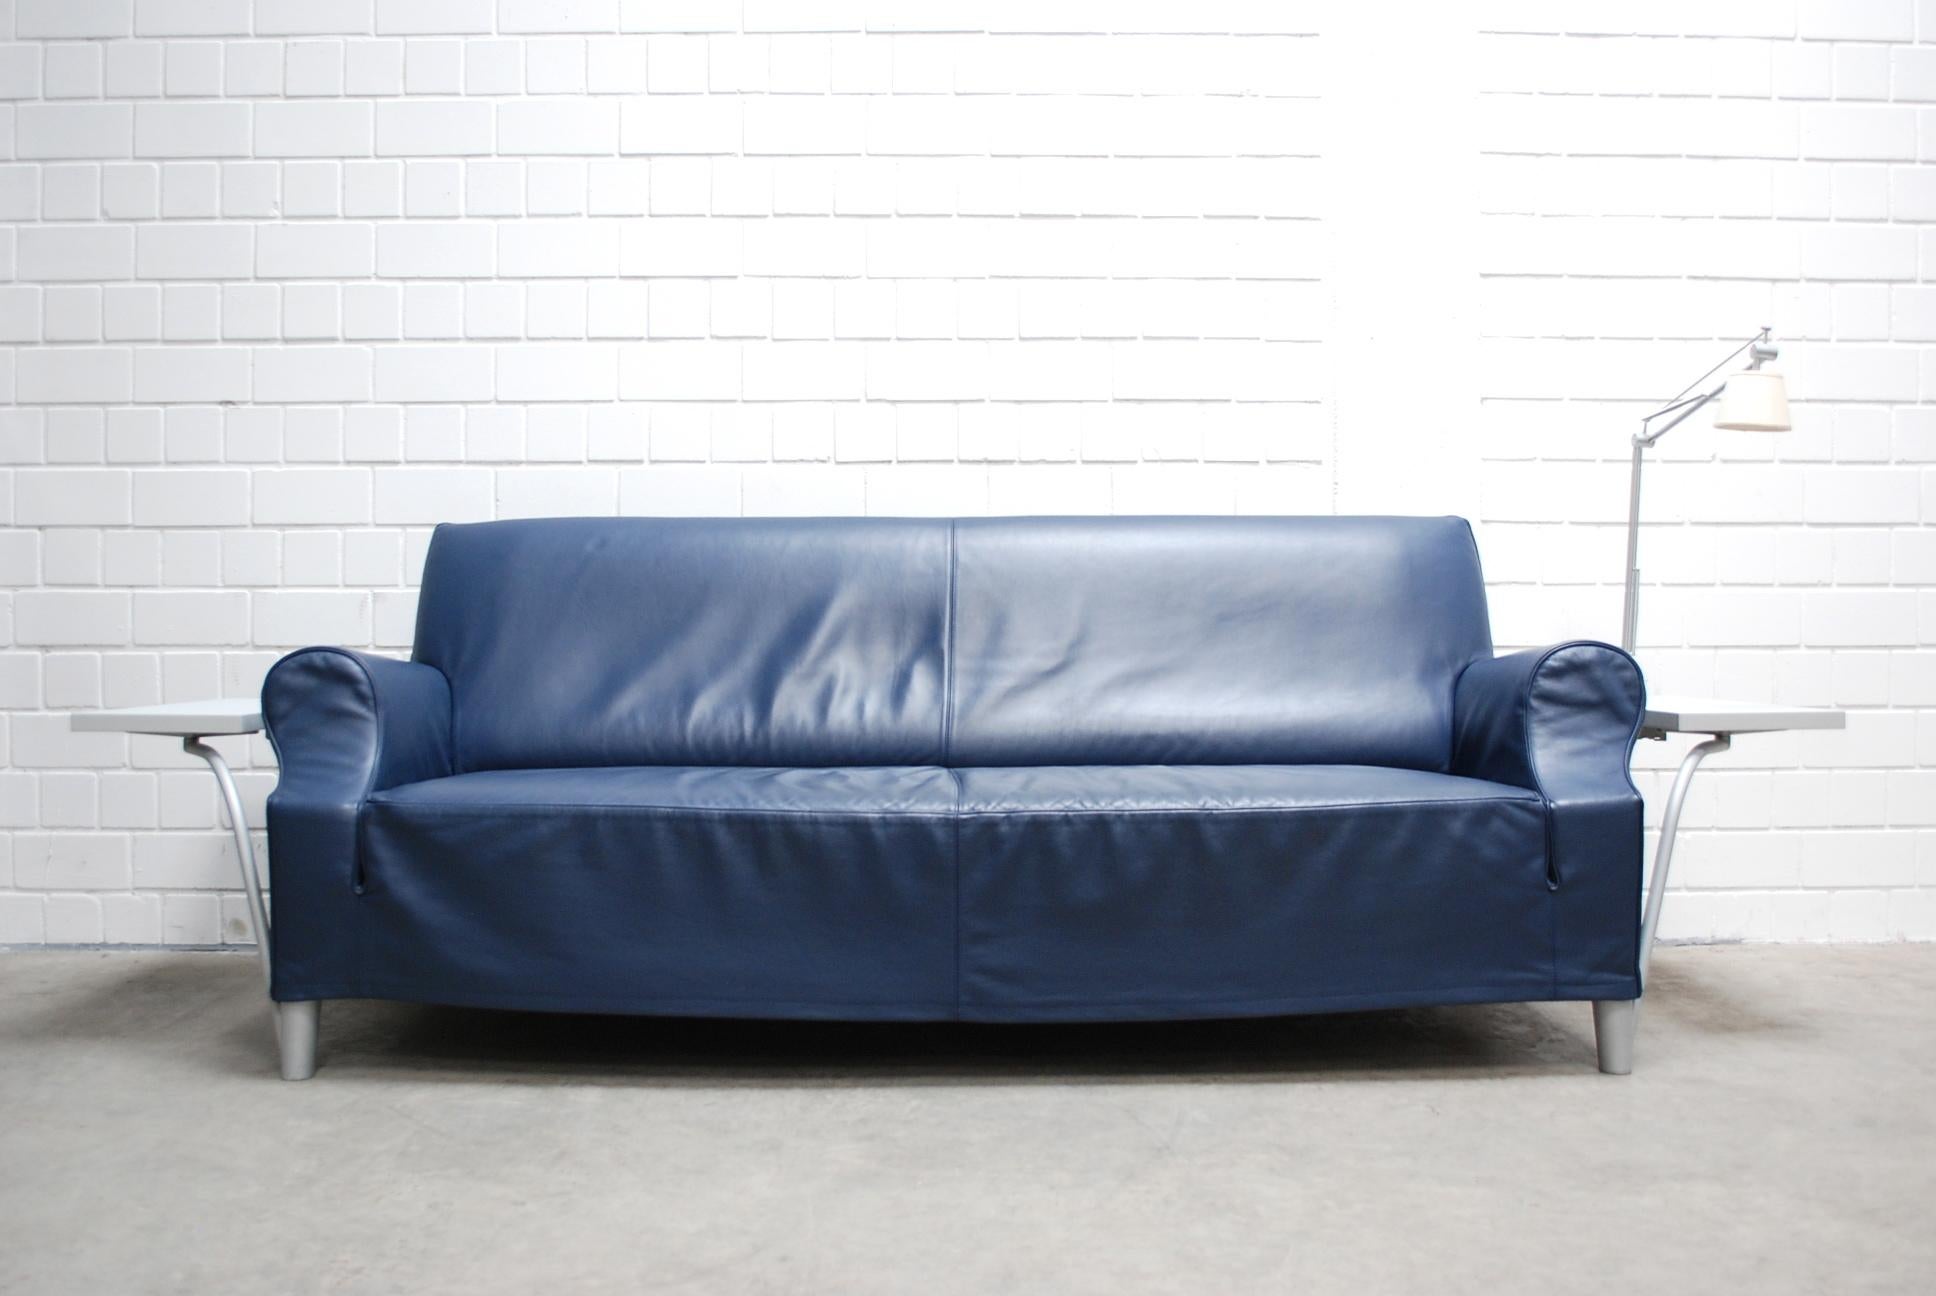 Philippe Starck designed this Model Lazy Sofa.
Blue leather sofa including a Flos Archimoon lamp. The lamp is removable.
It has shelves beside every armrests.
Feet made of aluminium.
